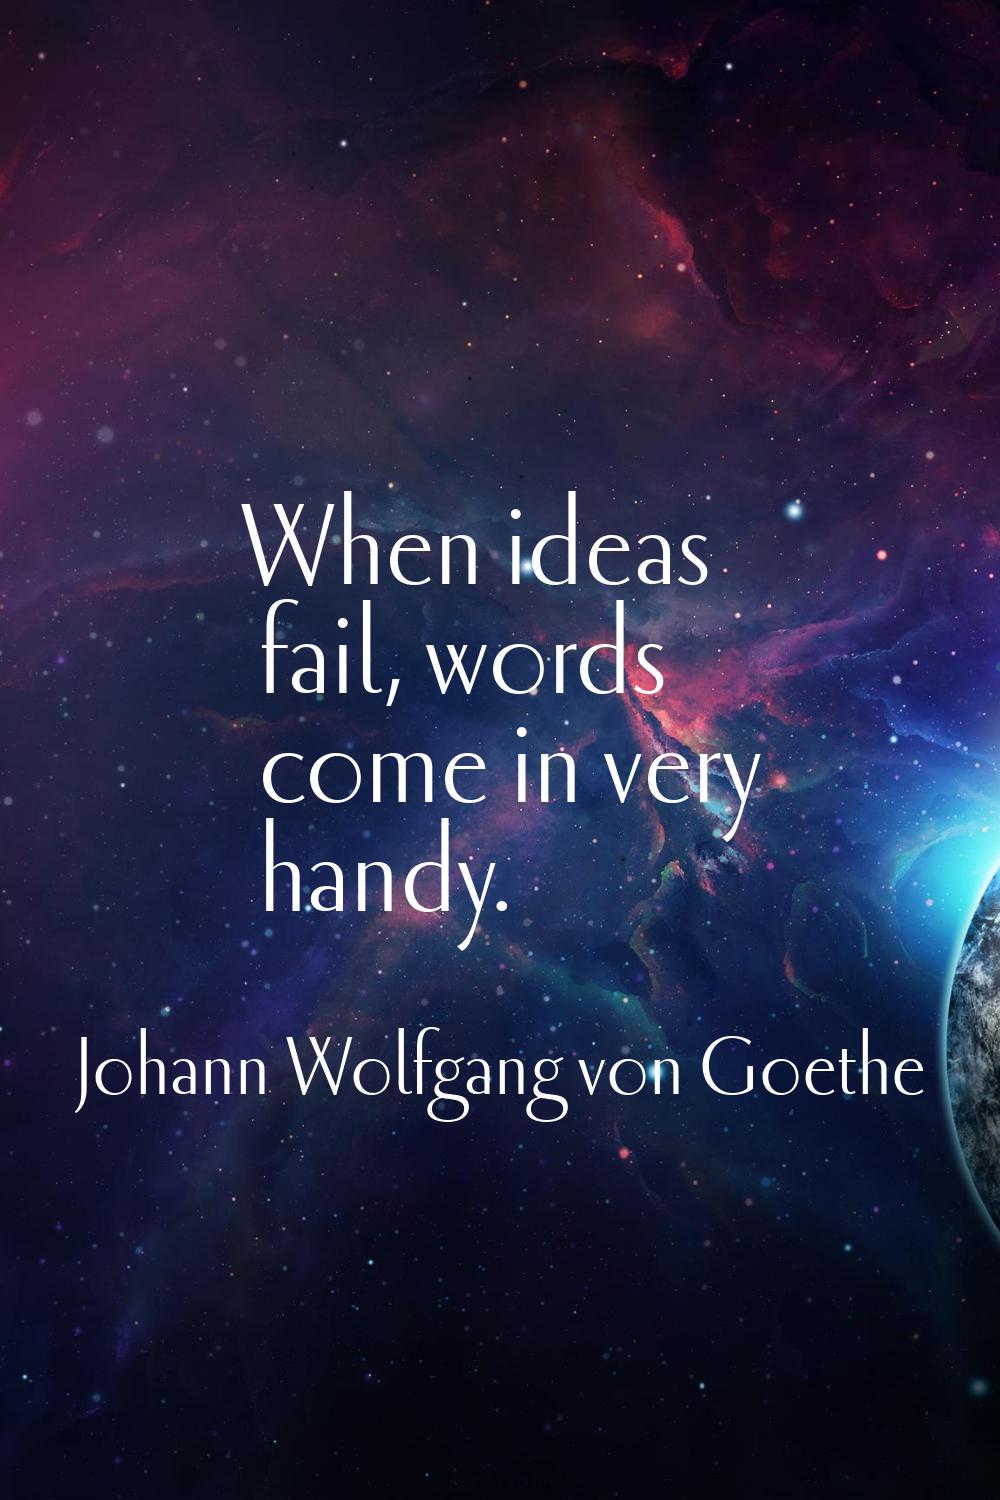 When ideas fail, words come in very handy.